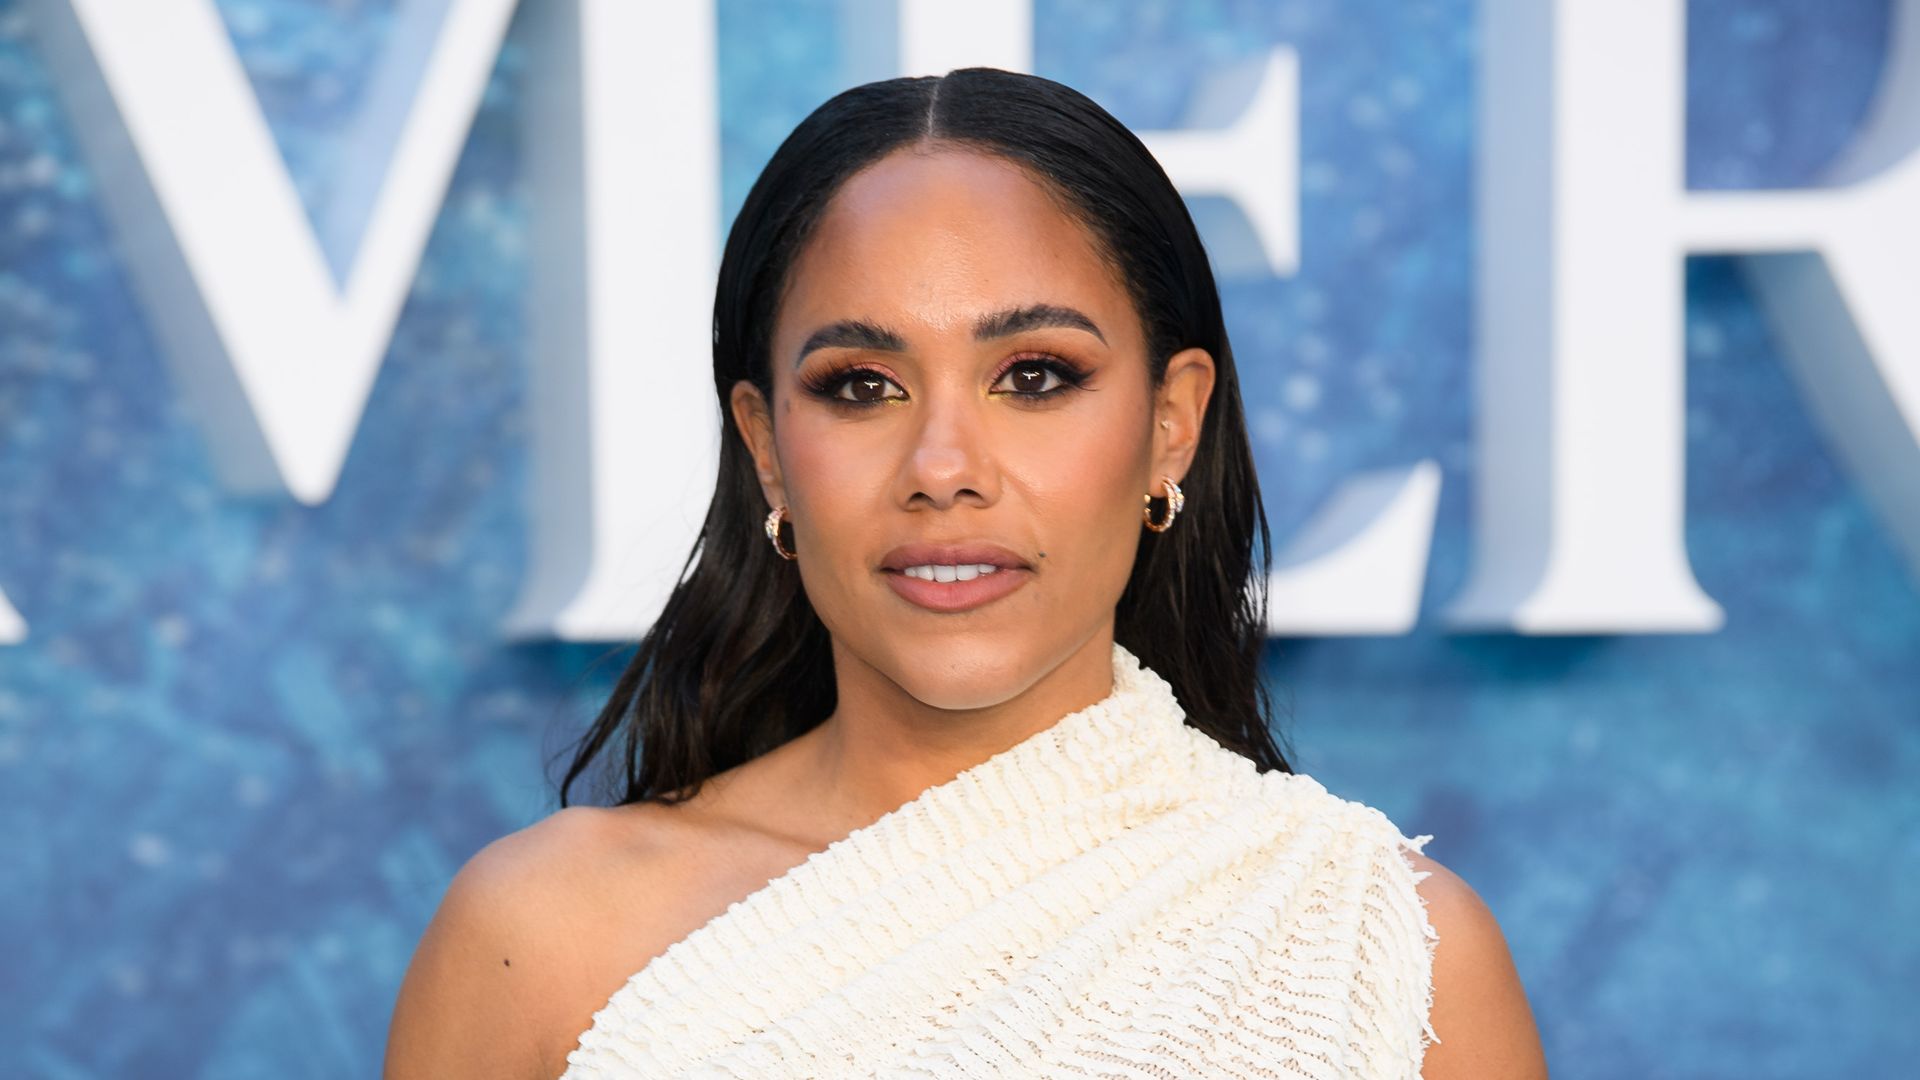 Alex Scott attends the UK Premiere of "The Little Mermaid" at Odeon Luxe Leicester Square on May 15, 2023 in London, England.